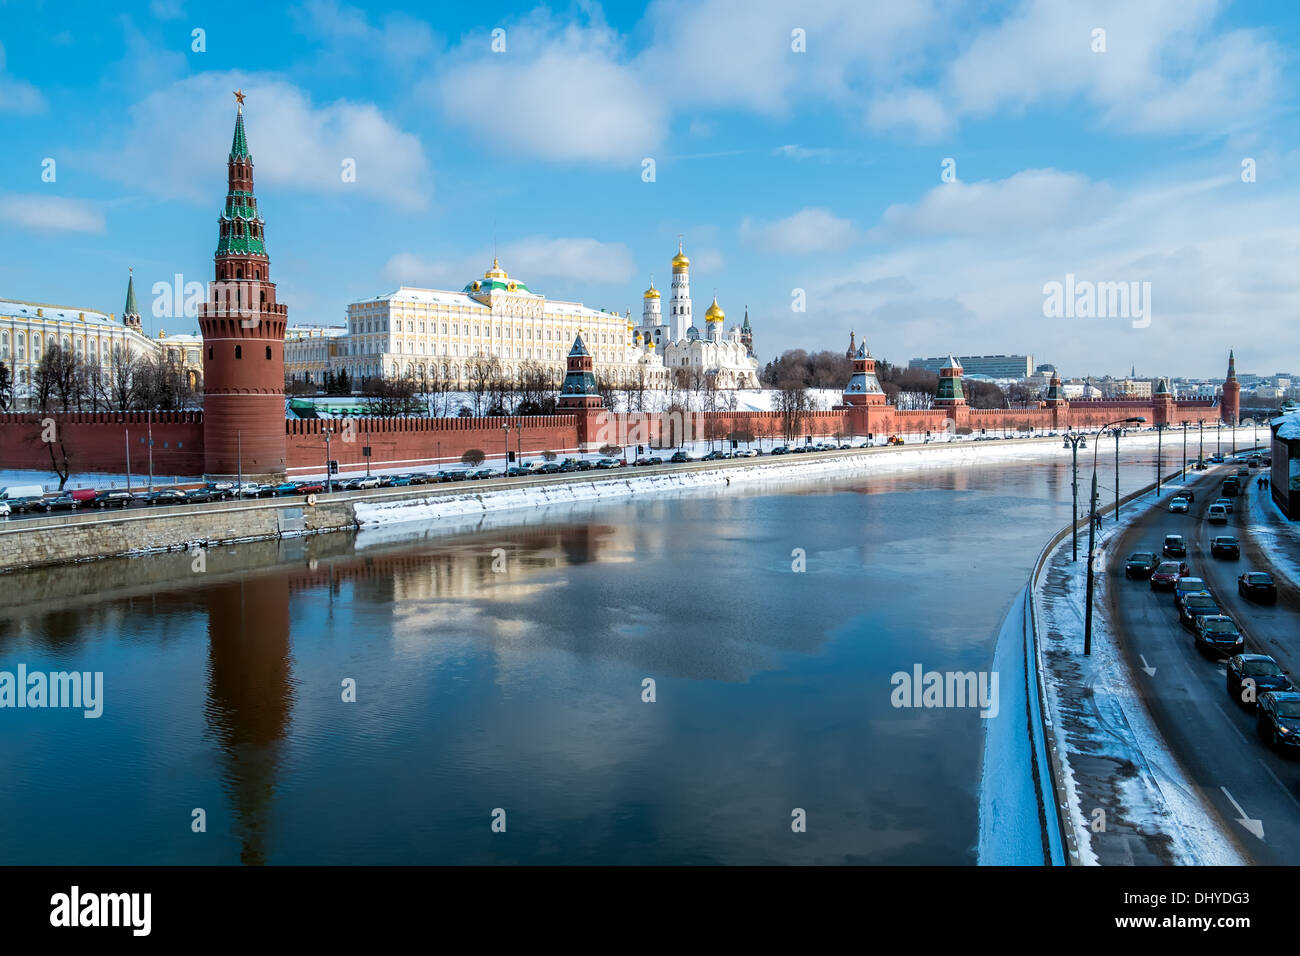 View of the Kremlin from the banks of the Moskva River in Moscow, Russia. Stock Photo